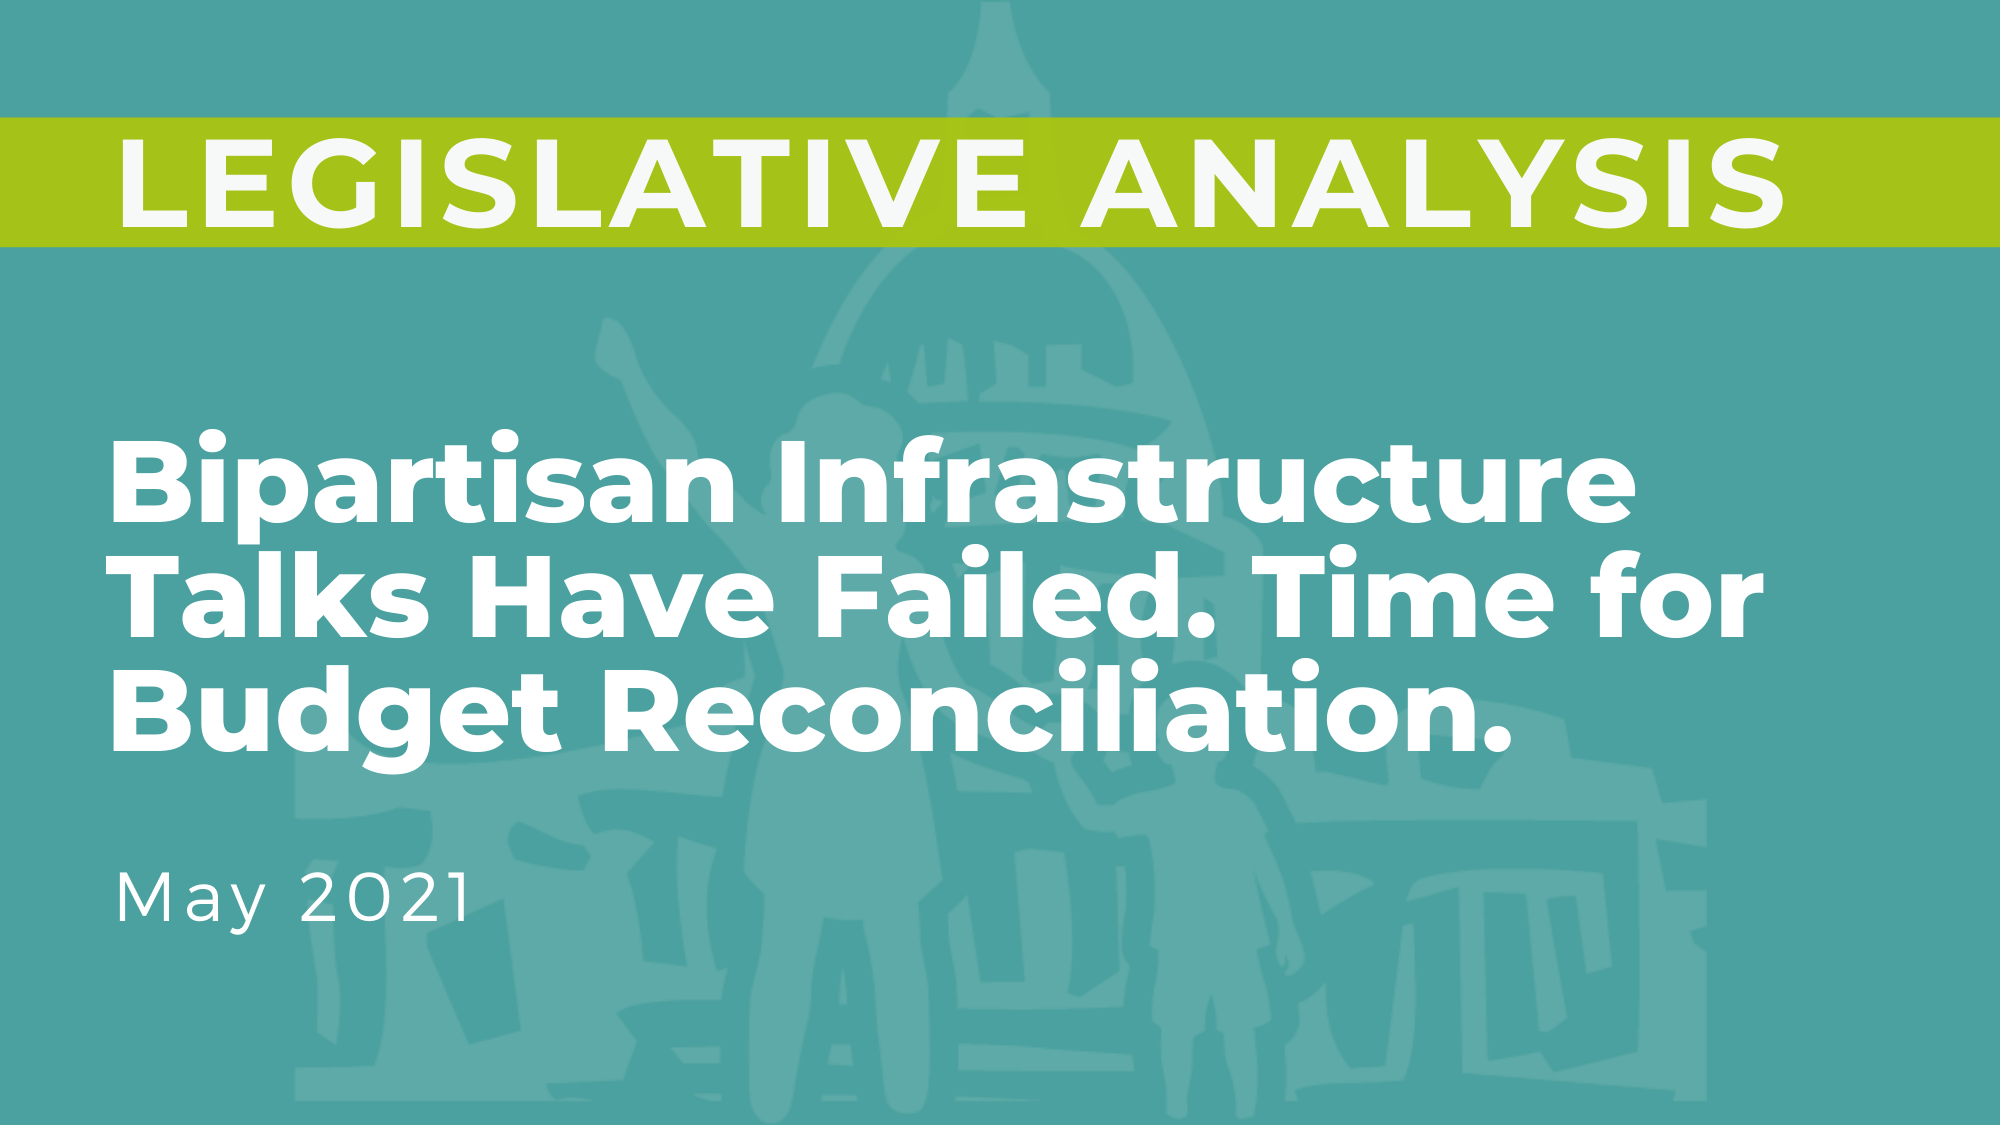 Bipartisan Infrastructure Talks Have Failed. Time for Budget Reconciliation.